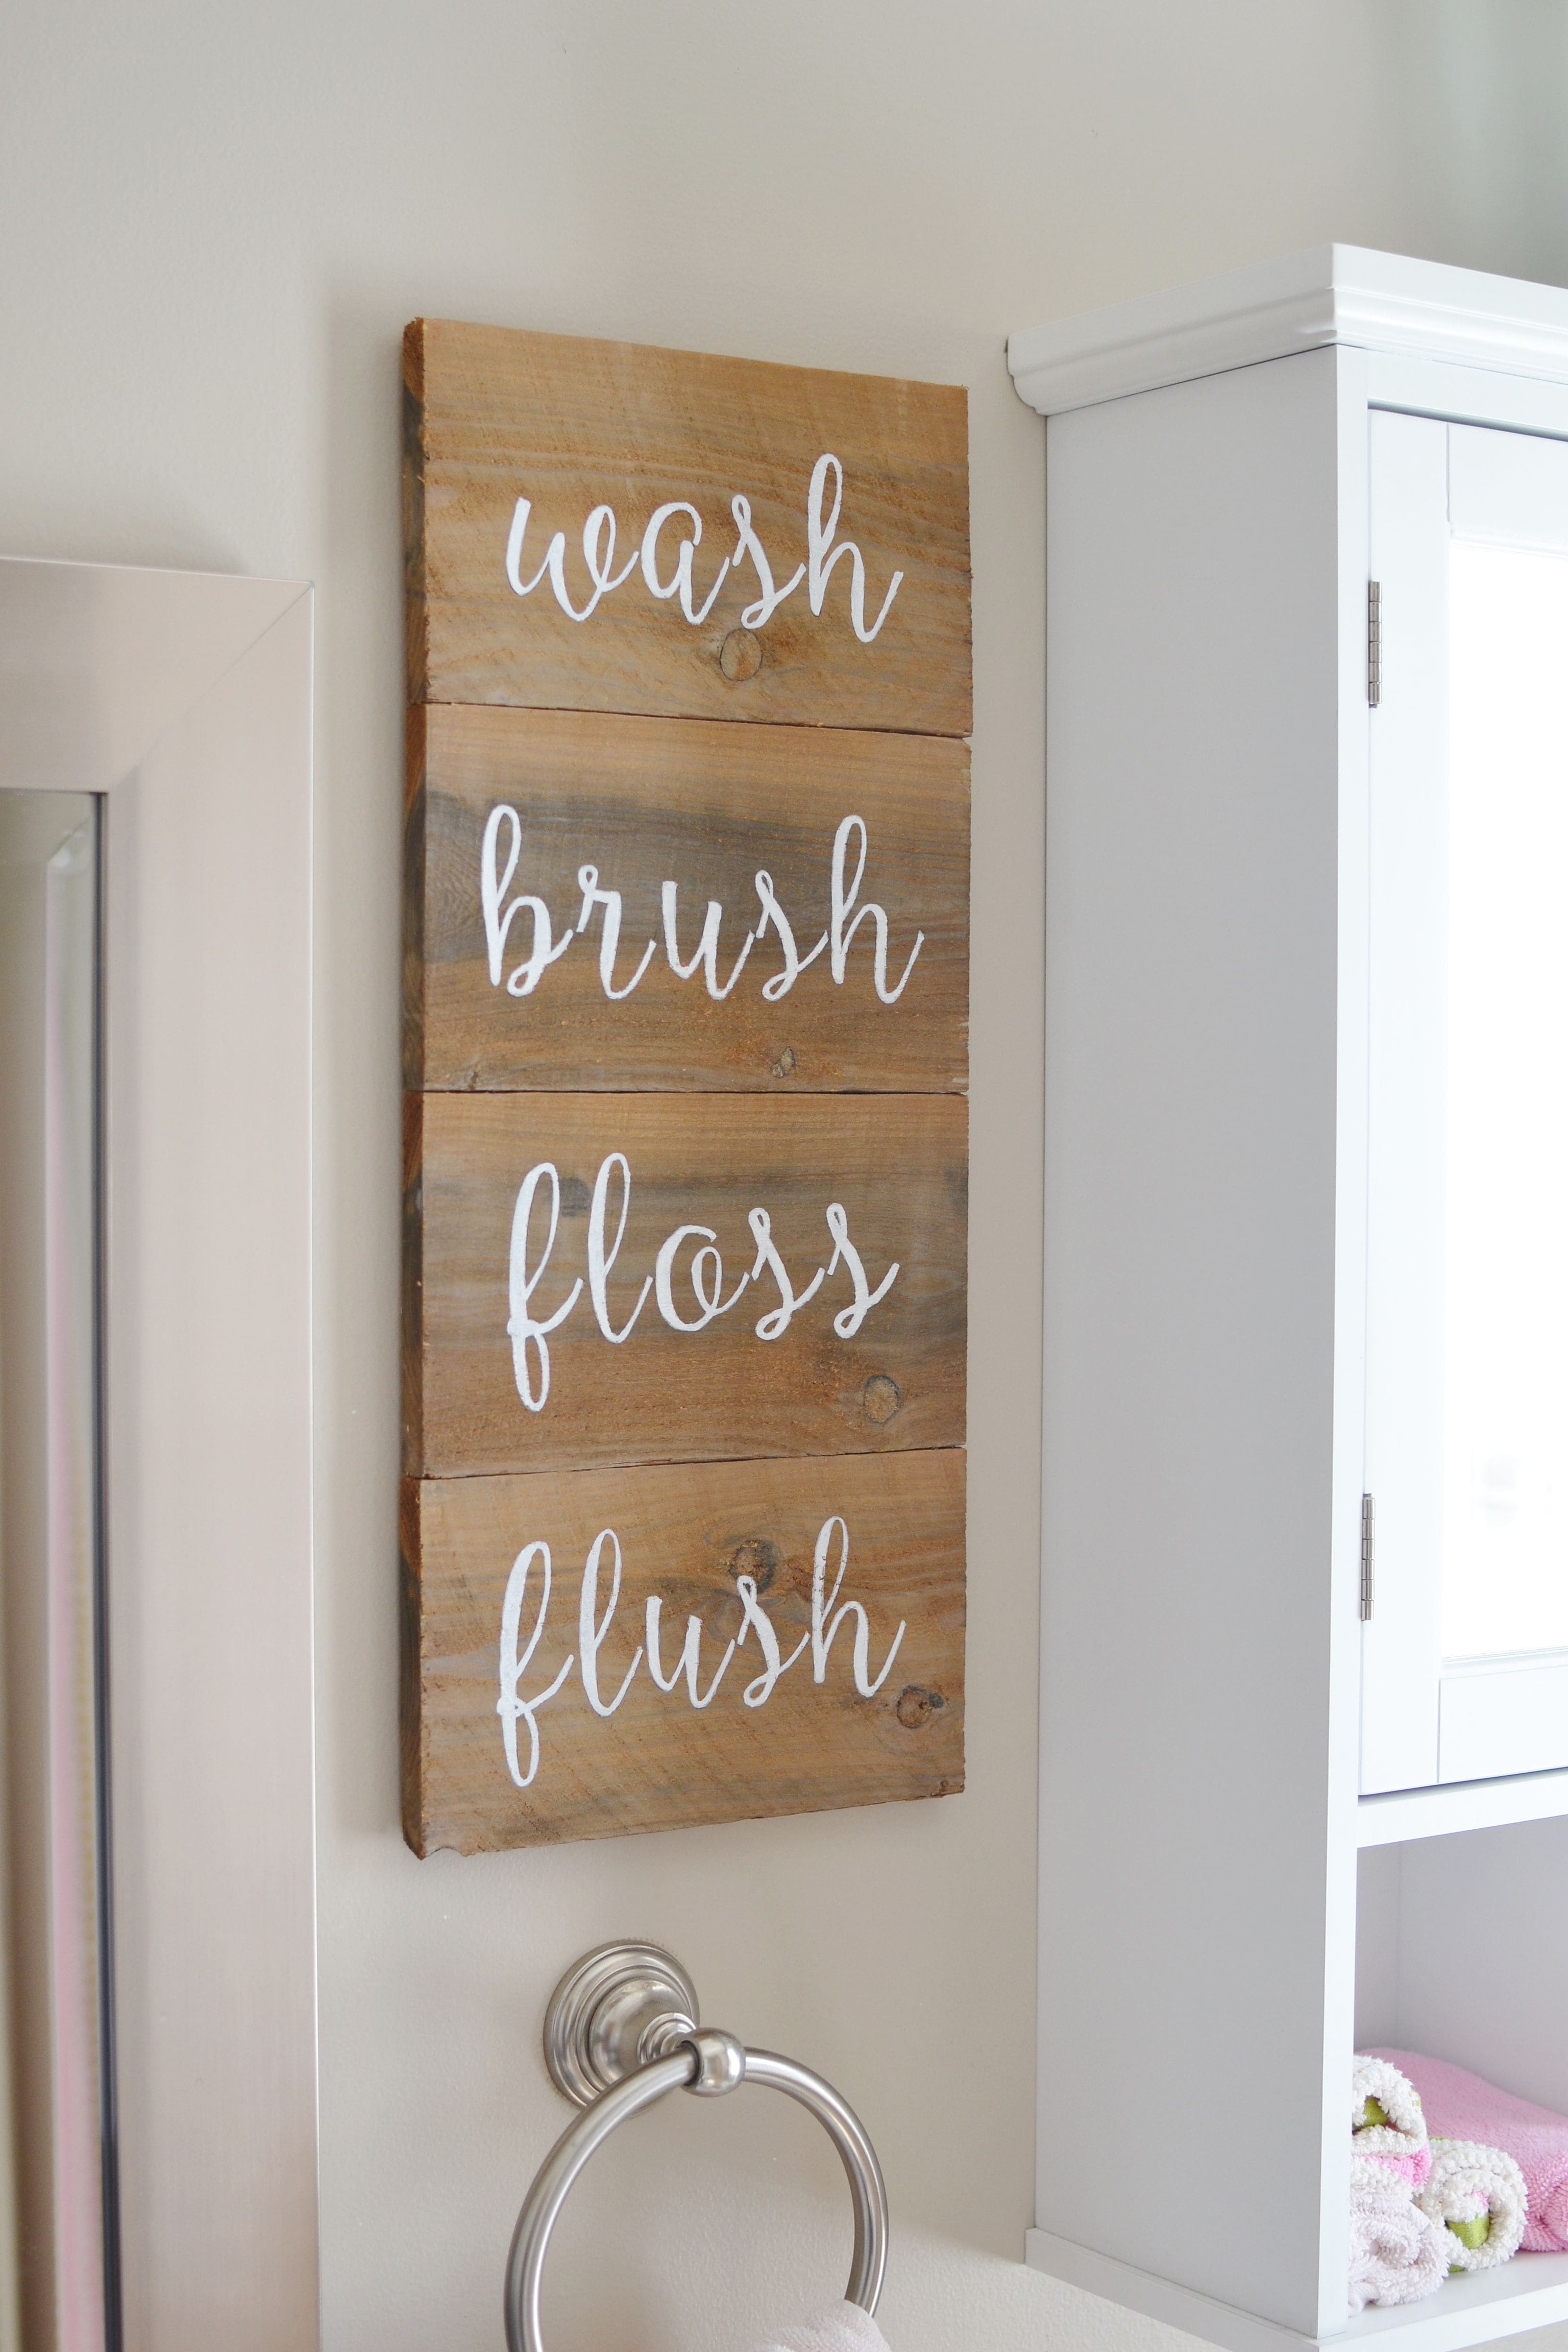 Pallet project ideas to decorate the bathroom - 79